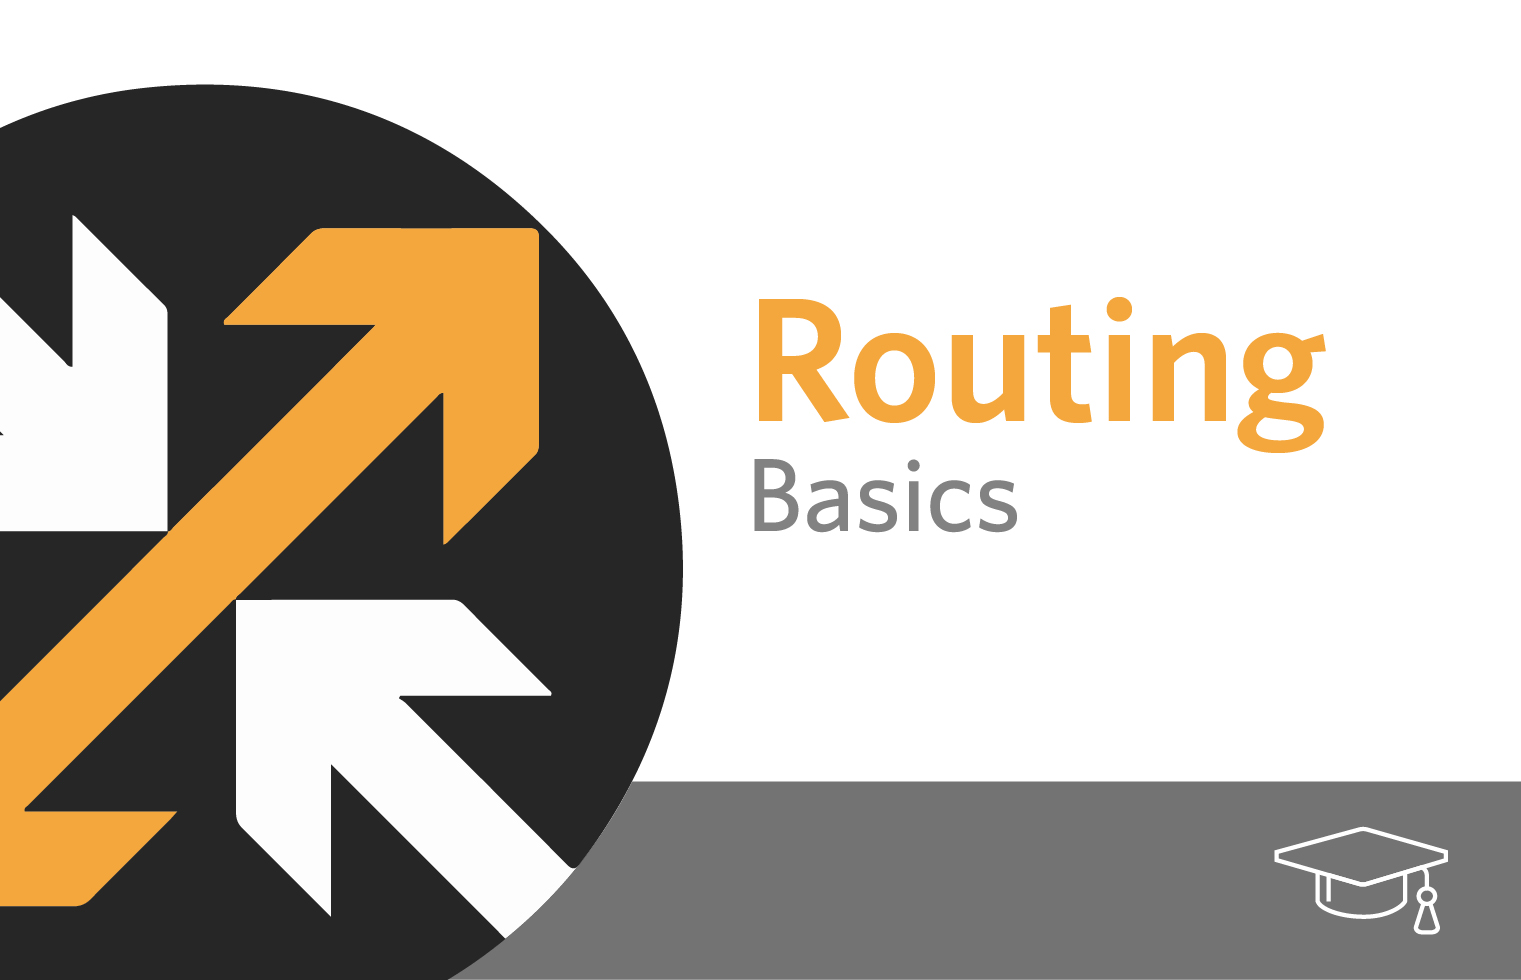 Routing Basics Course course image